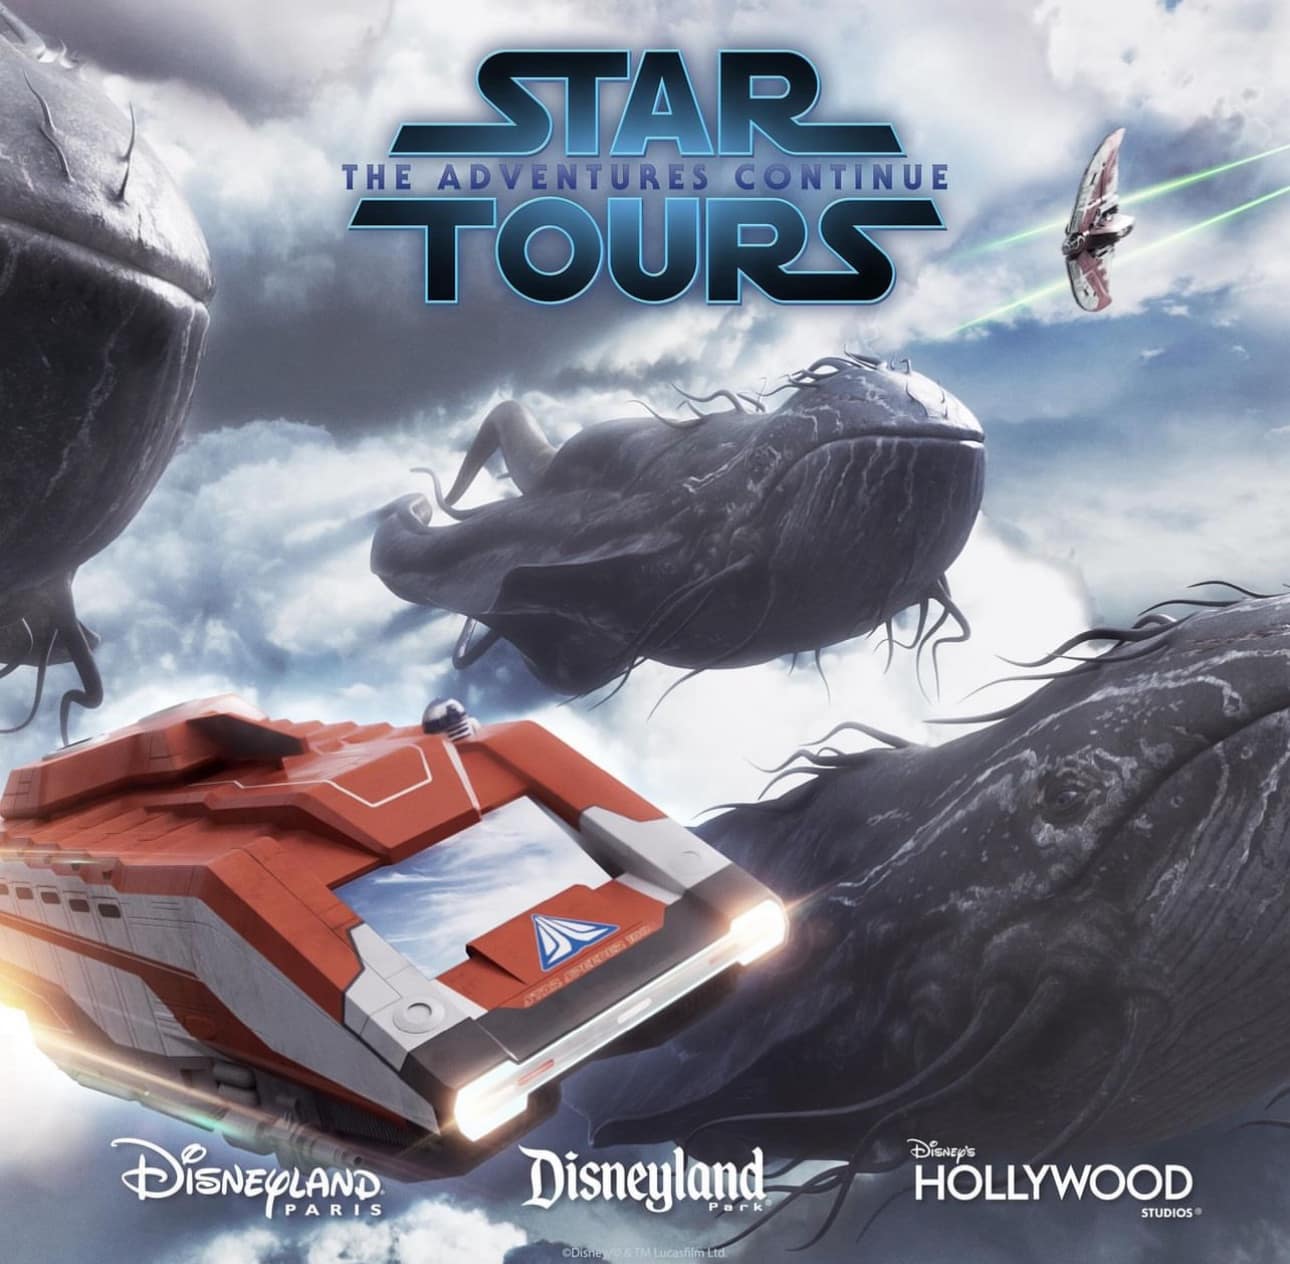 New Journeys Coming to Star Tours